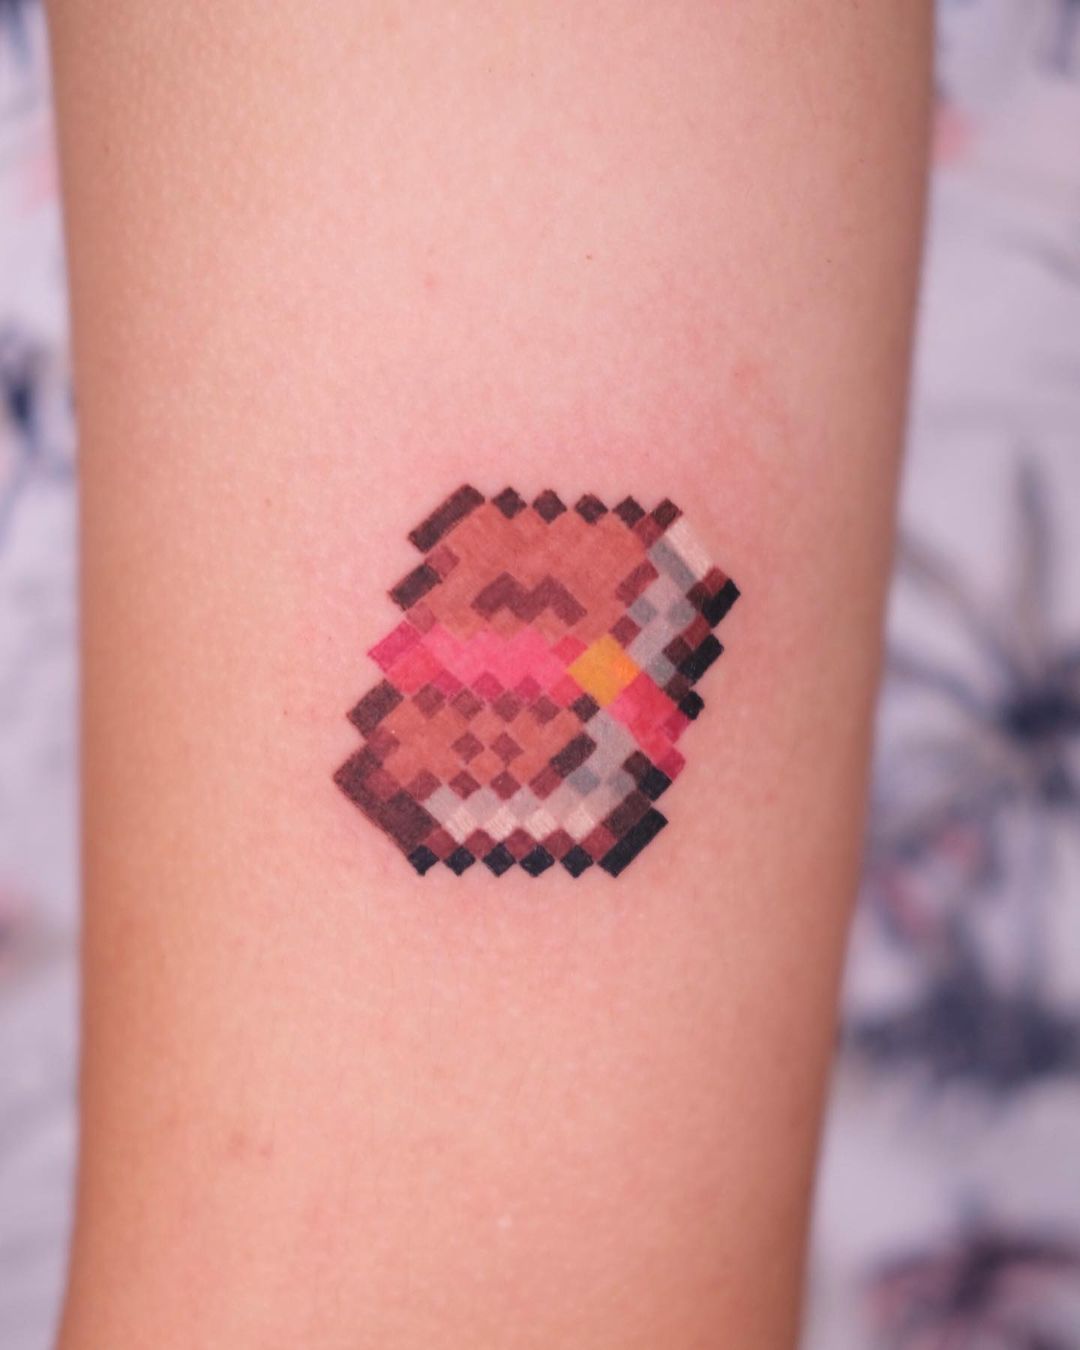 Spore lady tattoos a Milo on thigh with her bff as a friendship tattoo   Singapore Foodie King